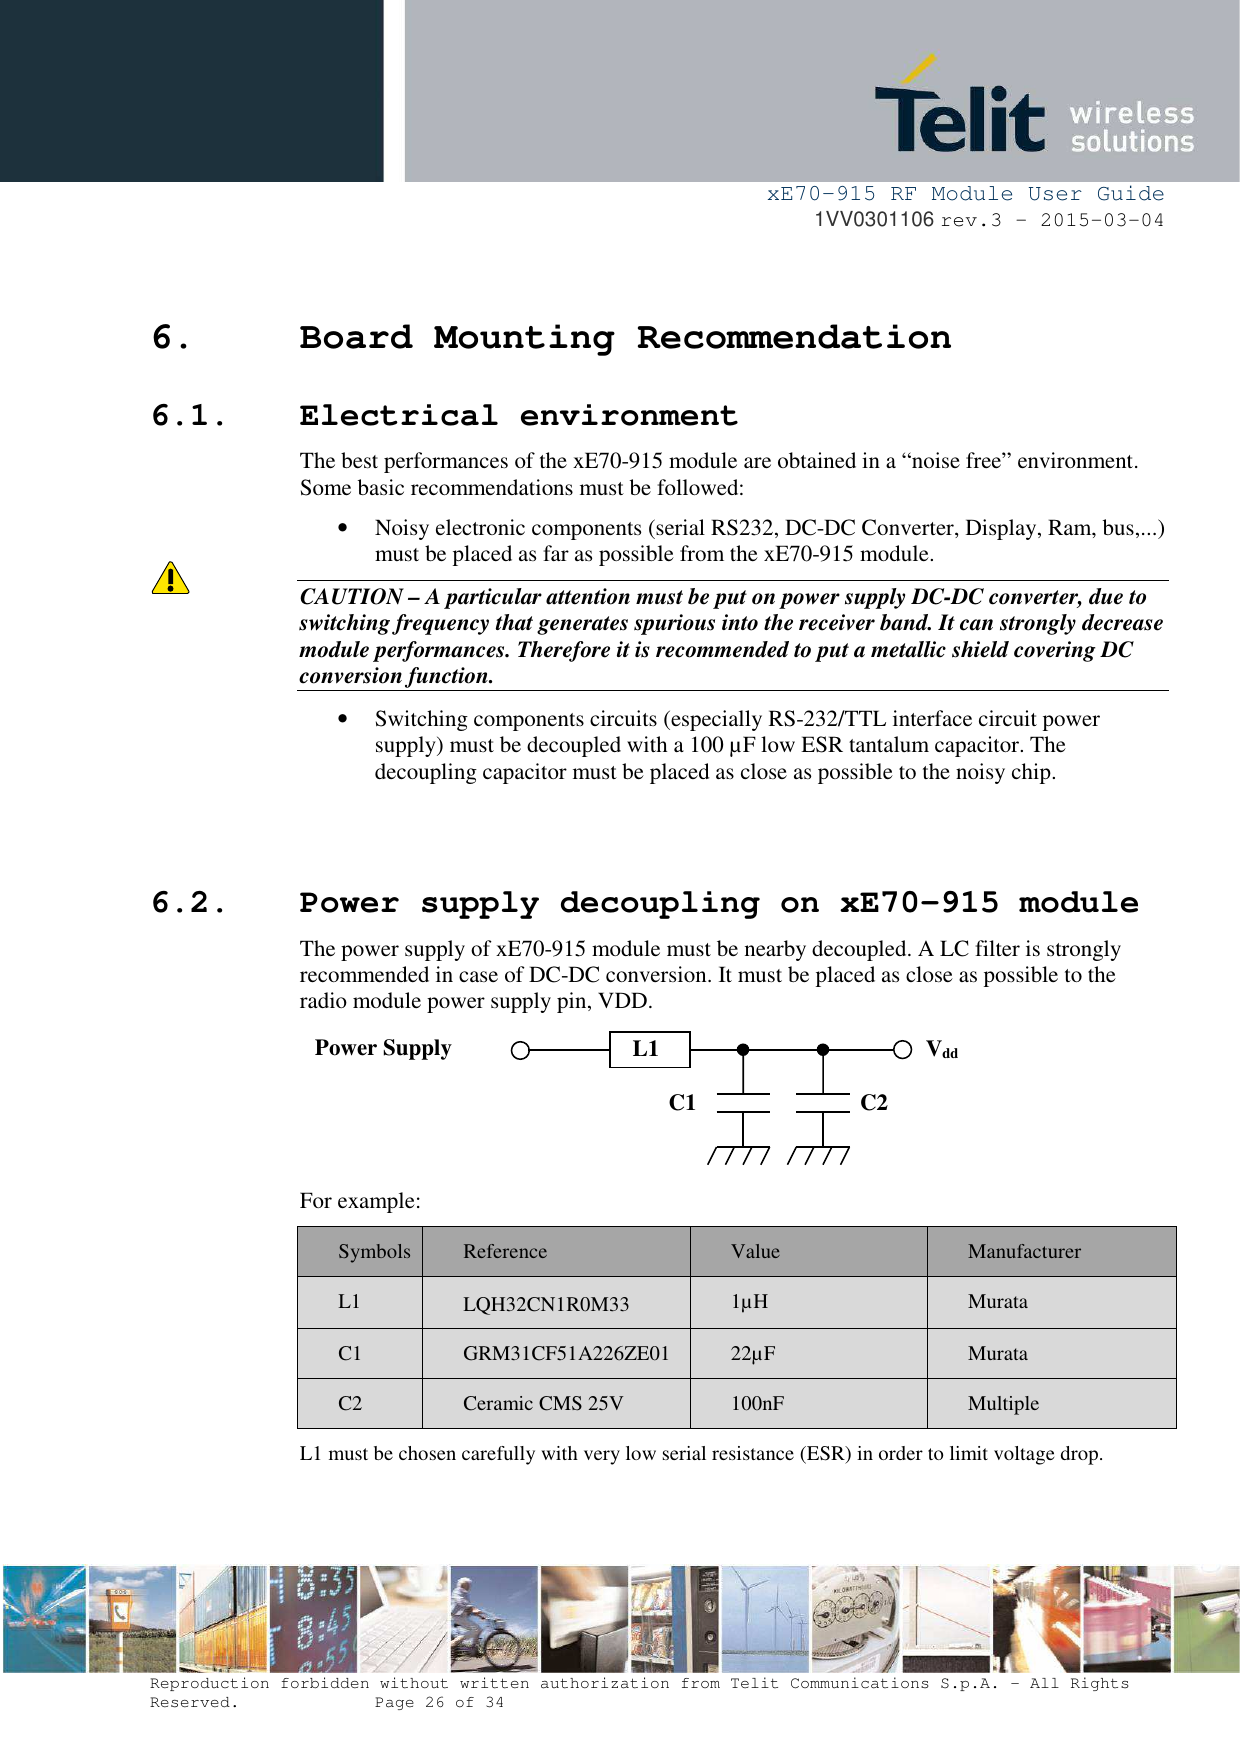     xE70-915 RF Module User Guide 1VV0301106 rev.3 – 2015-03-04  Reproduction forbidden without written authorization from Telit Communications S.p.A. - All Rights Reserved.    Page 26 of 34  6. Board Mounting Recommendation 6.1. Electrical environment The best performances of the xE70-915 module are obtained in a “noise free” environment. Some basic recommendations must be followed: • Noisy electronic components (serial RS232, DC-DC Converter, Display, Ram, bus,...) must be placed as far as possible from the xE70-915 module. CAUTION – A particular attention must be put on power supply DC-DC converter, due to switching frequency that generates spurious into the receiver band. It can strongly decrease module performances. Therefore it is recommended to put a metallic shield covering DC conversion function. • Switching components circuits (especially RS-232/TTL interface circuit power supply) must be decoupled with a 100 µF low ESR tantalum capacitor. The decoupling capacitor must be placed as close as possible to the noisy chip.   6.2. Power supply decoupling on xE70-915 module The power supply of xE70-915 module must be nearby decoupled. A LC filter is strongly recommended in case of DC-DC conversion. It must be placed as close as possible to the radio module power supply pin, VDD.  For example: Symbols  Reference  Value  Manufacturer L1  LQH32CN1R0M33   1µH  Murata C1  GRM31CF51A226ZE01  22µF  Murata C2  Ceramic CMS 25V  100nF  Multiple L1 must be chosen carefully with very low serial resistance (ESR) in order to limit voltage drop. Vdd C1  C2 Power Supply  L1 